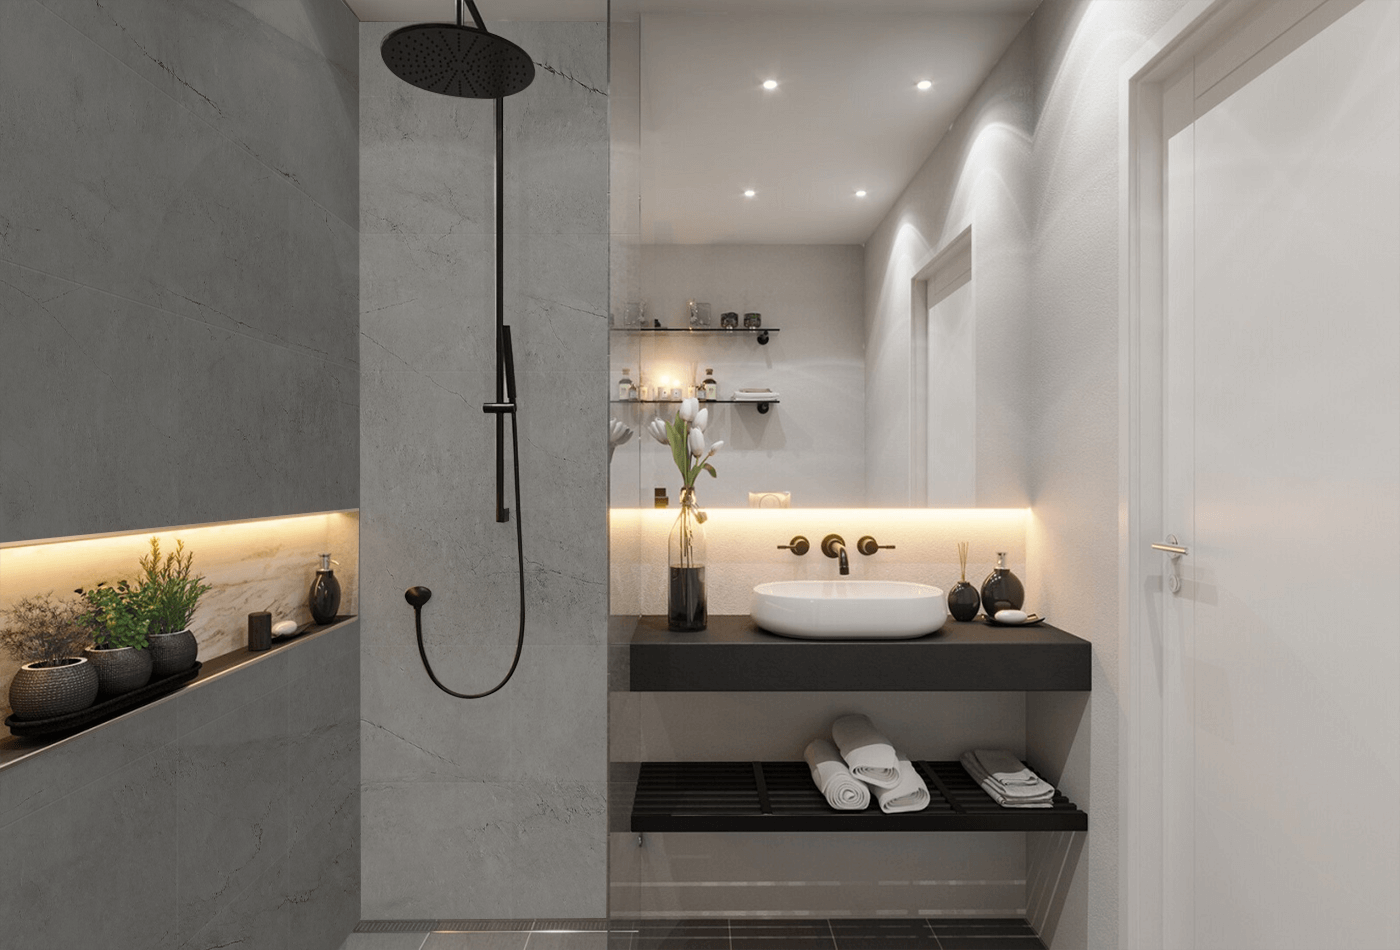 Can We Use Porcelain for Bathrooms